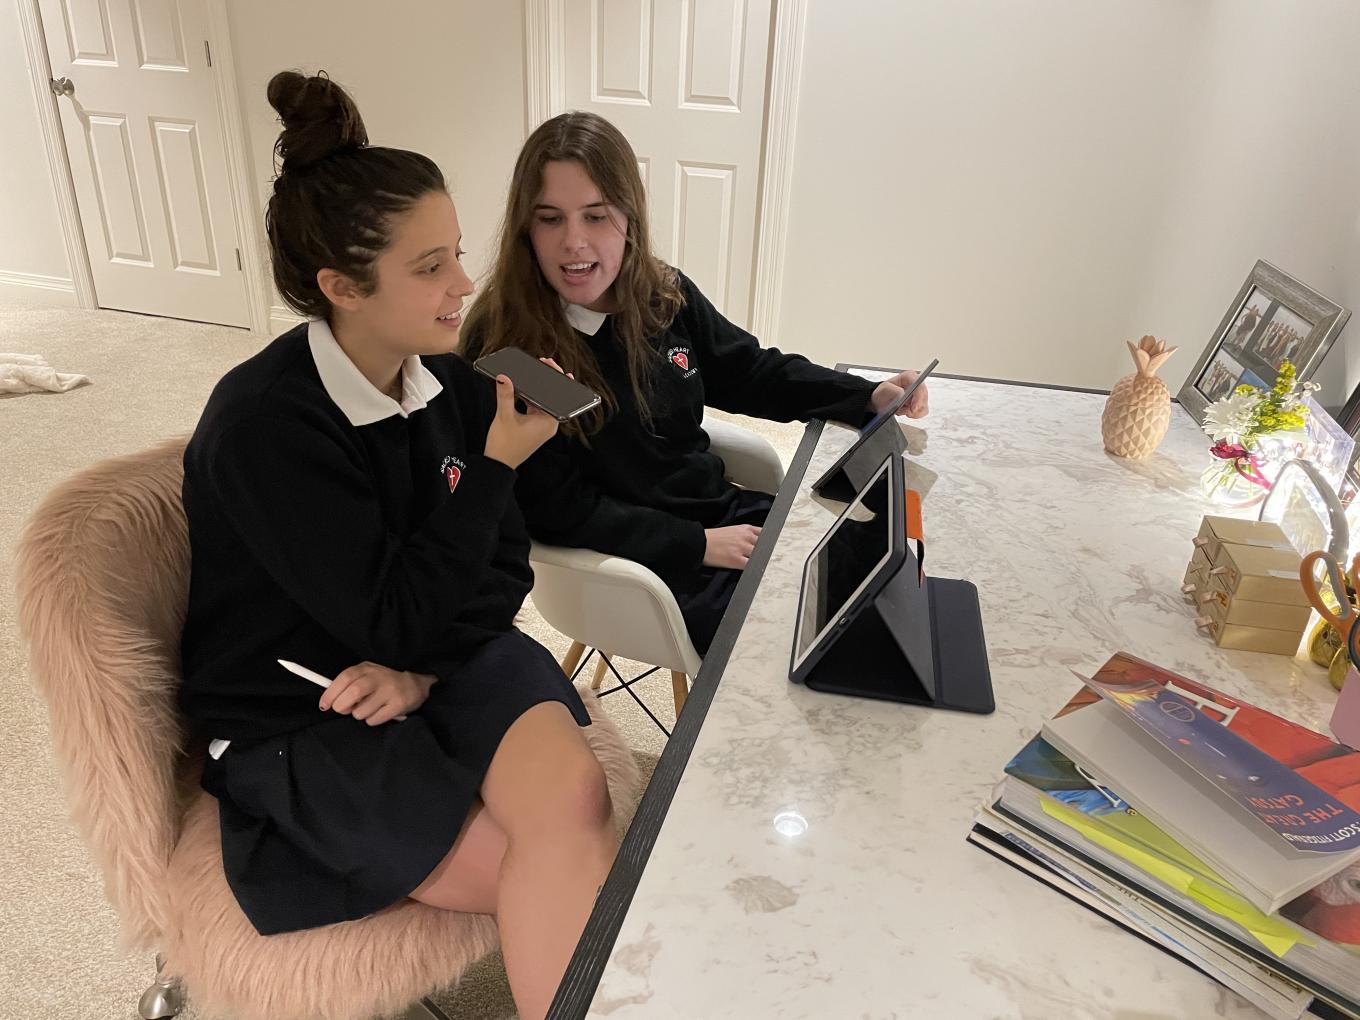 Jacqueline and Amelie sitting at a white desk working on their project.